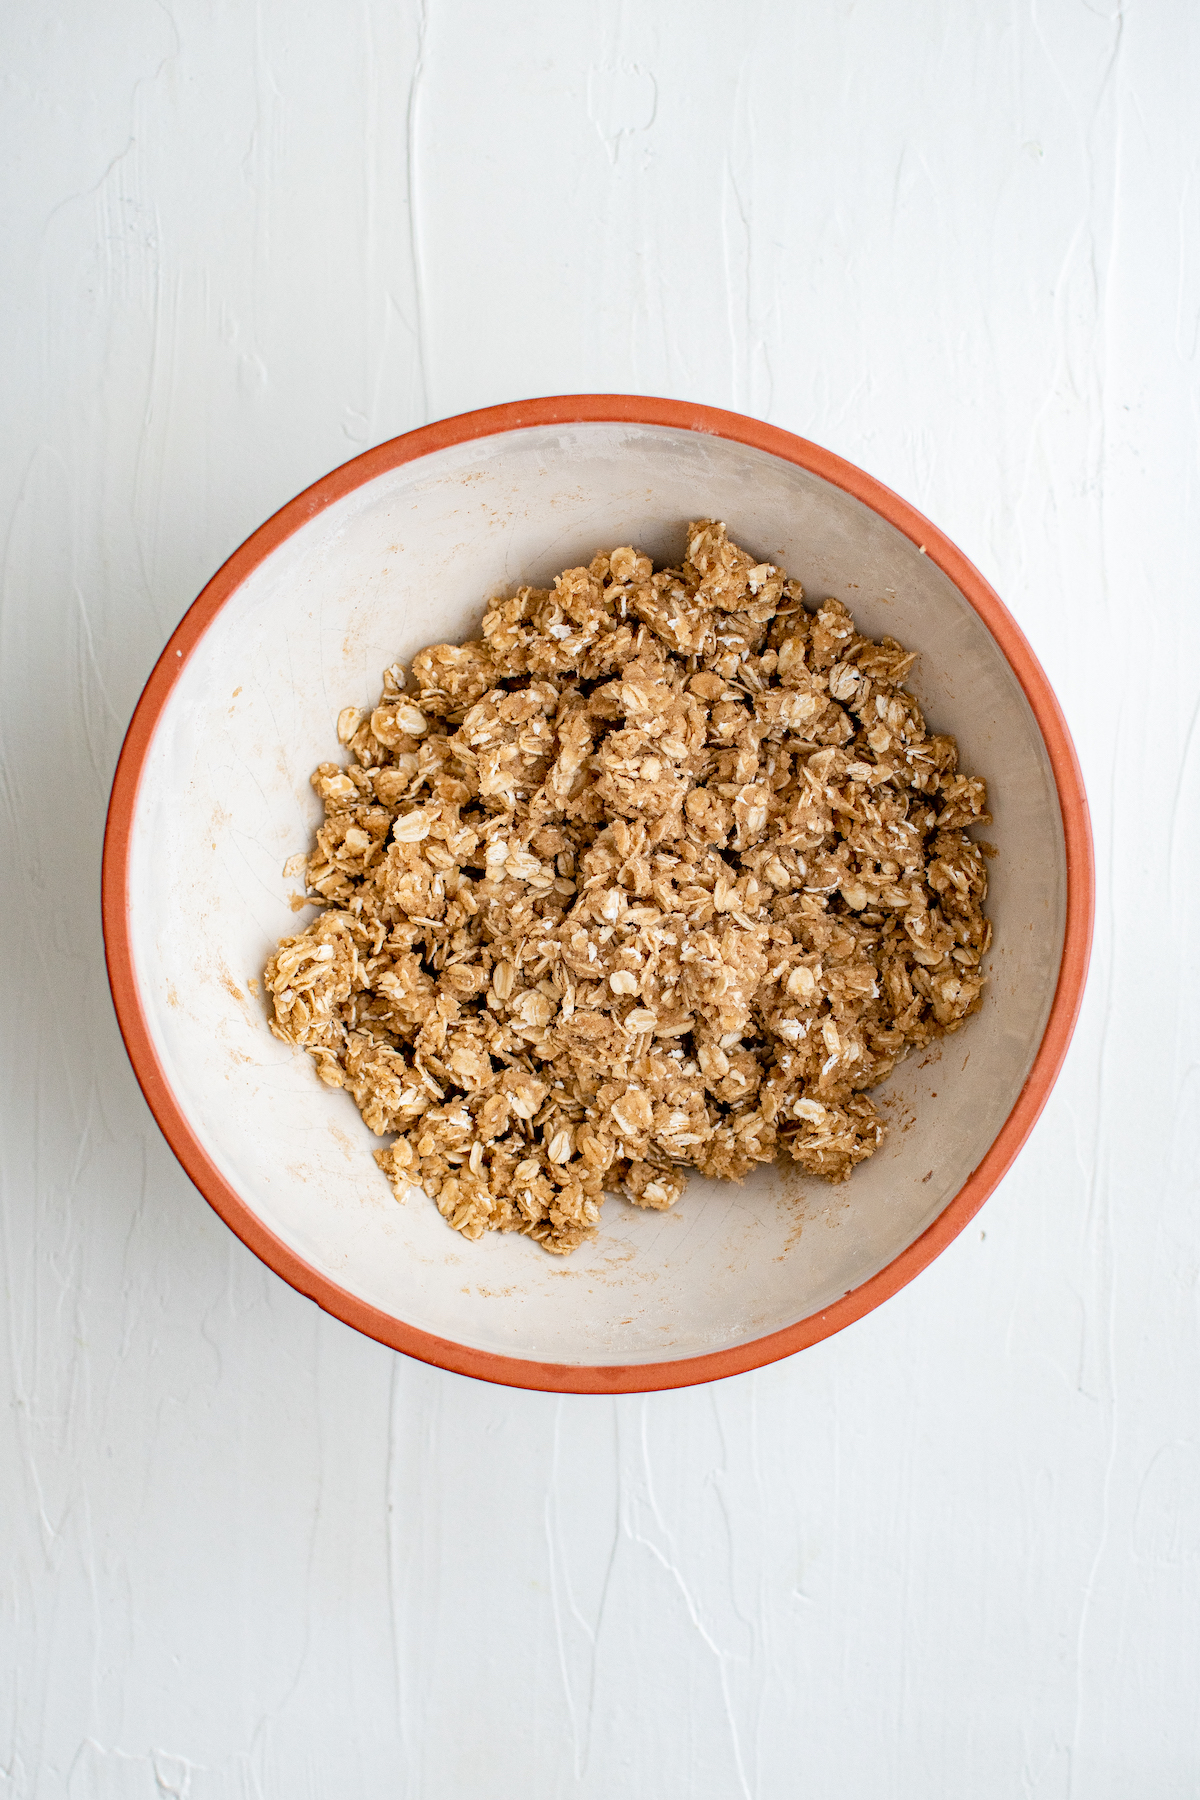 A bowl of uncooked oat topping.